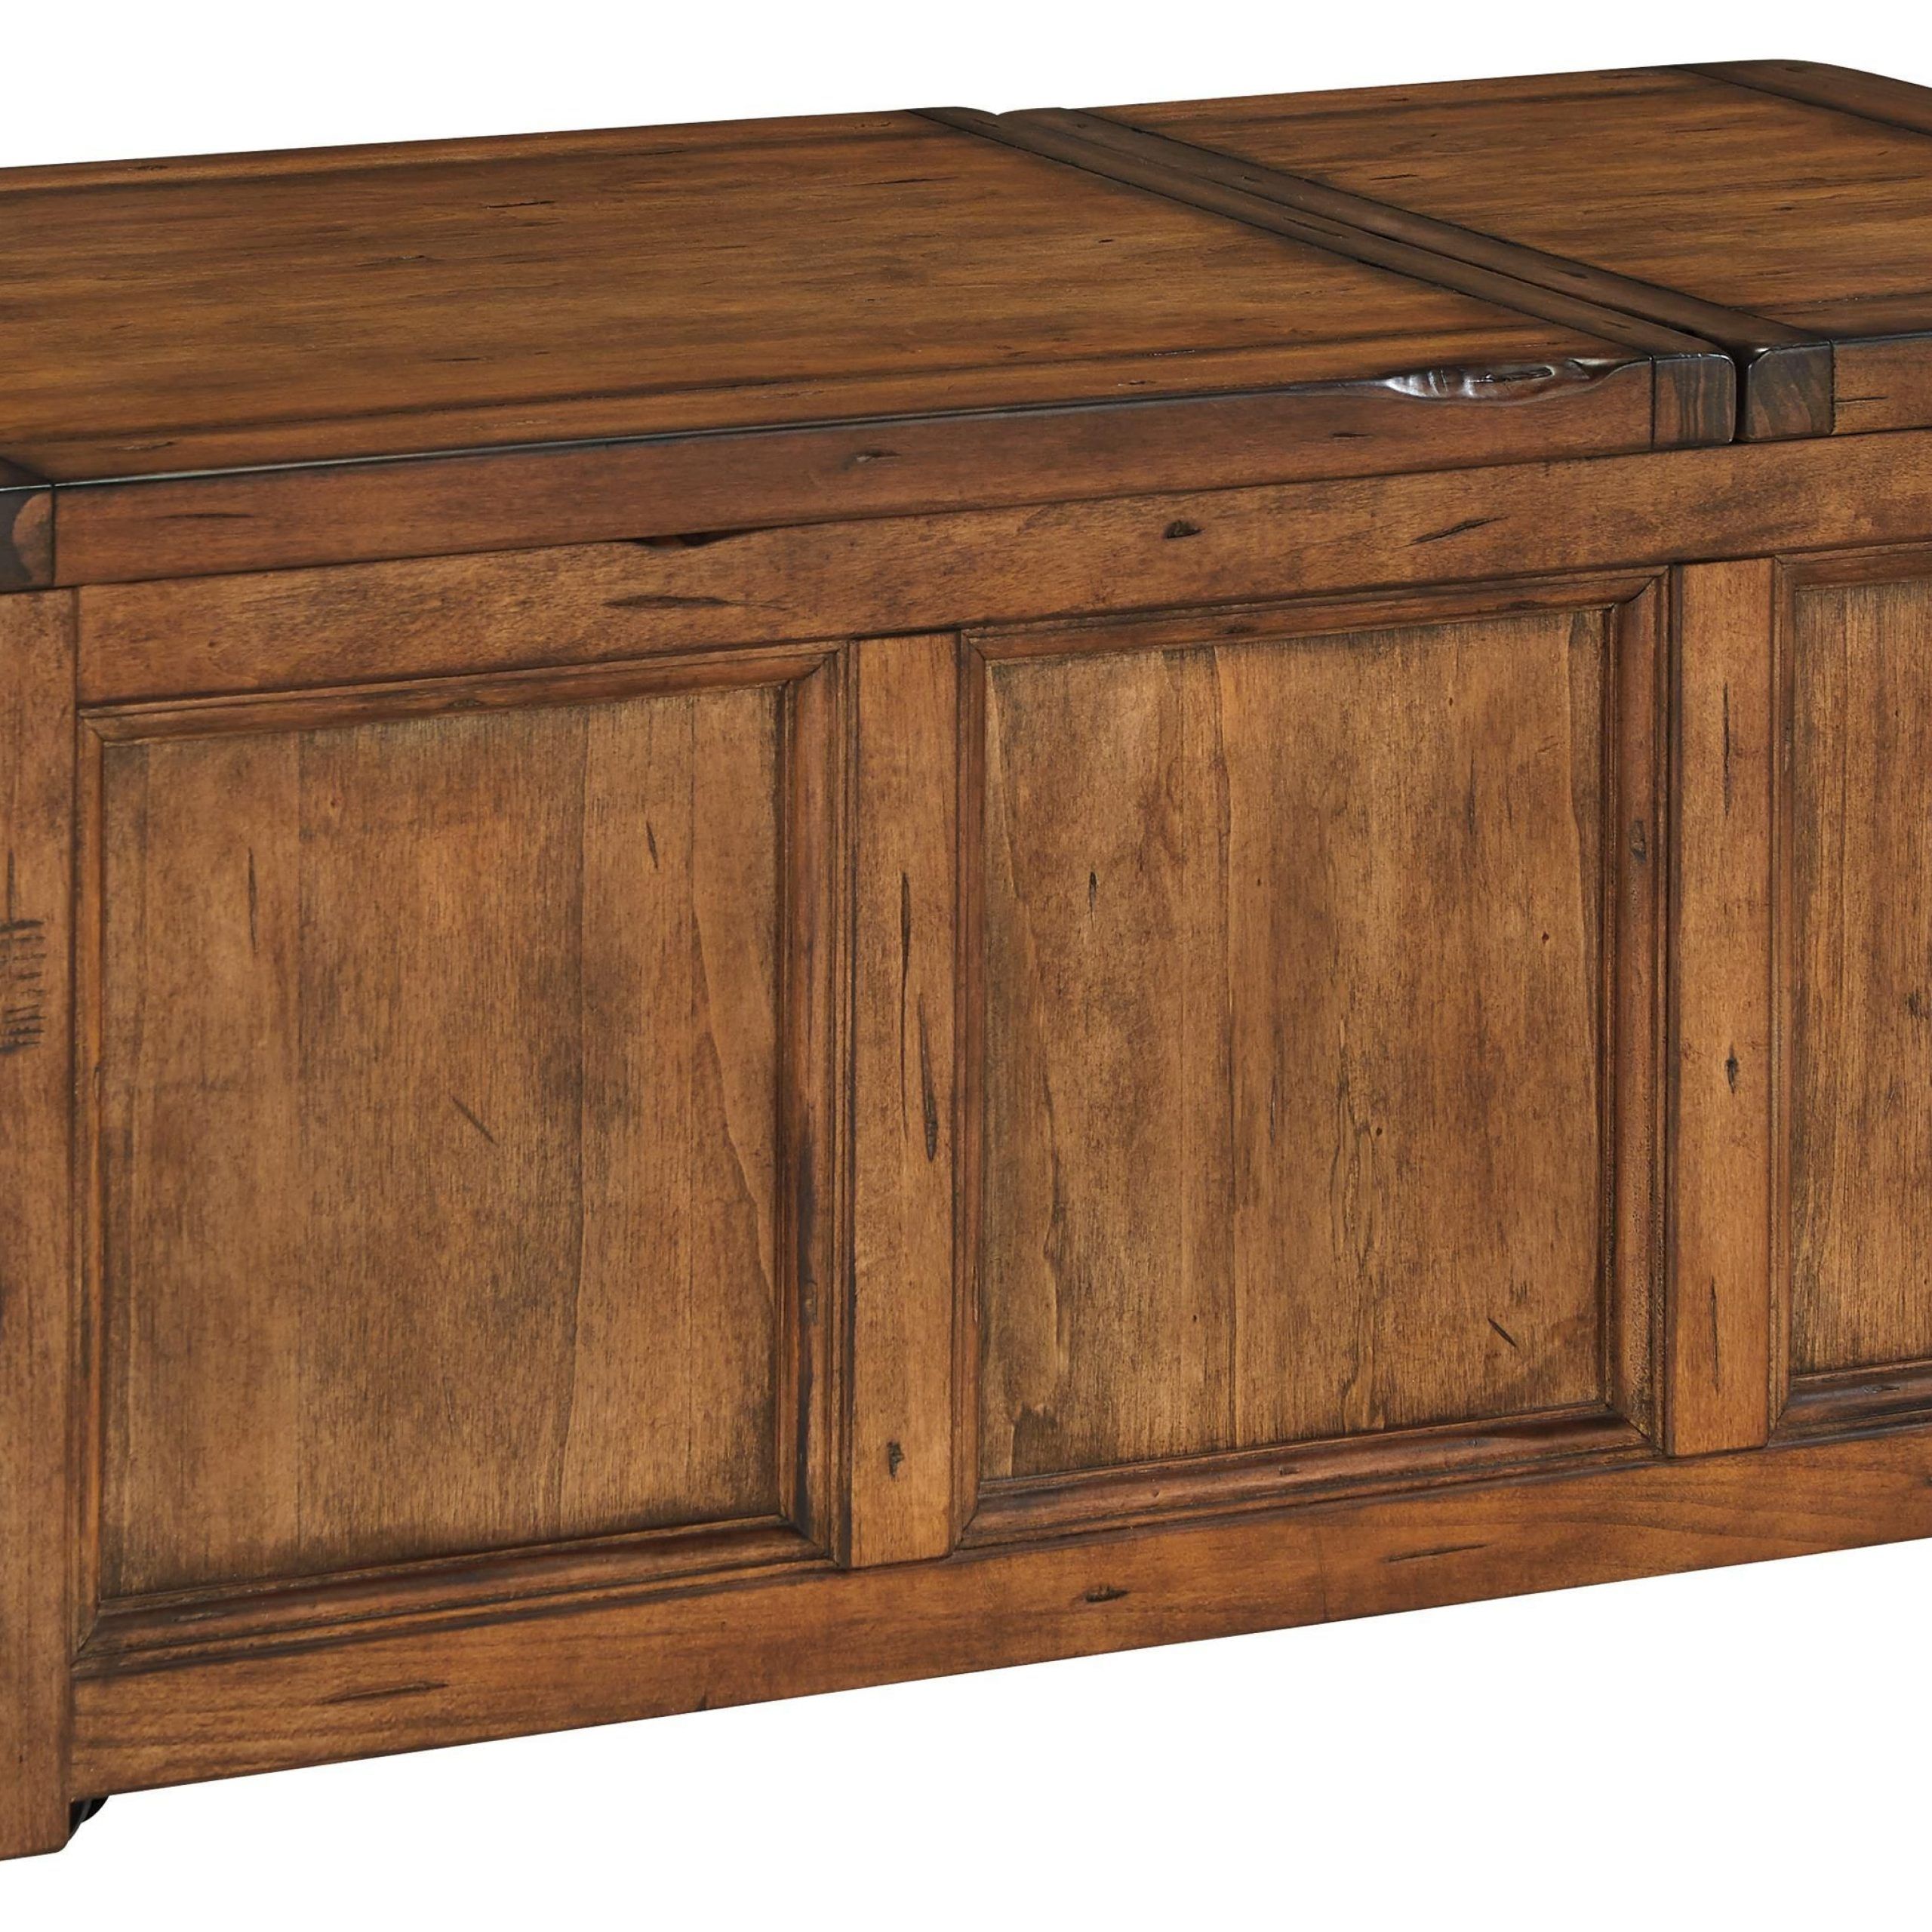 Tamonie Rustic Trunk Style Rectangular Lift Top Cocktail With Walnut Wood Storage Trunk Cocktail Tables (View 4 of 15)